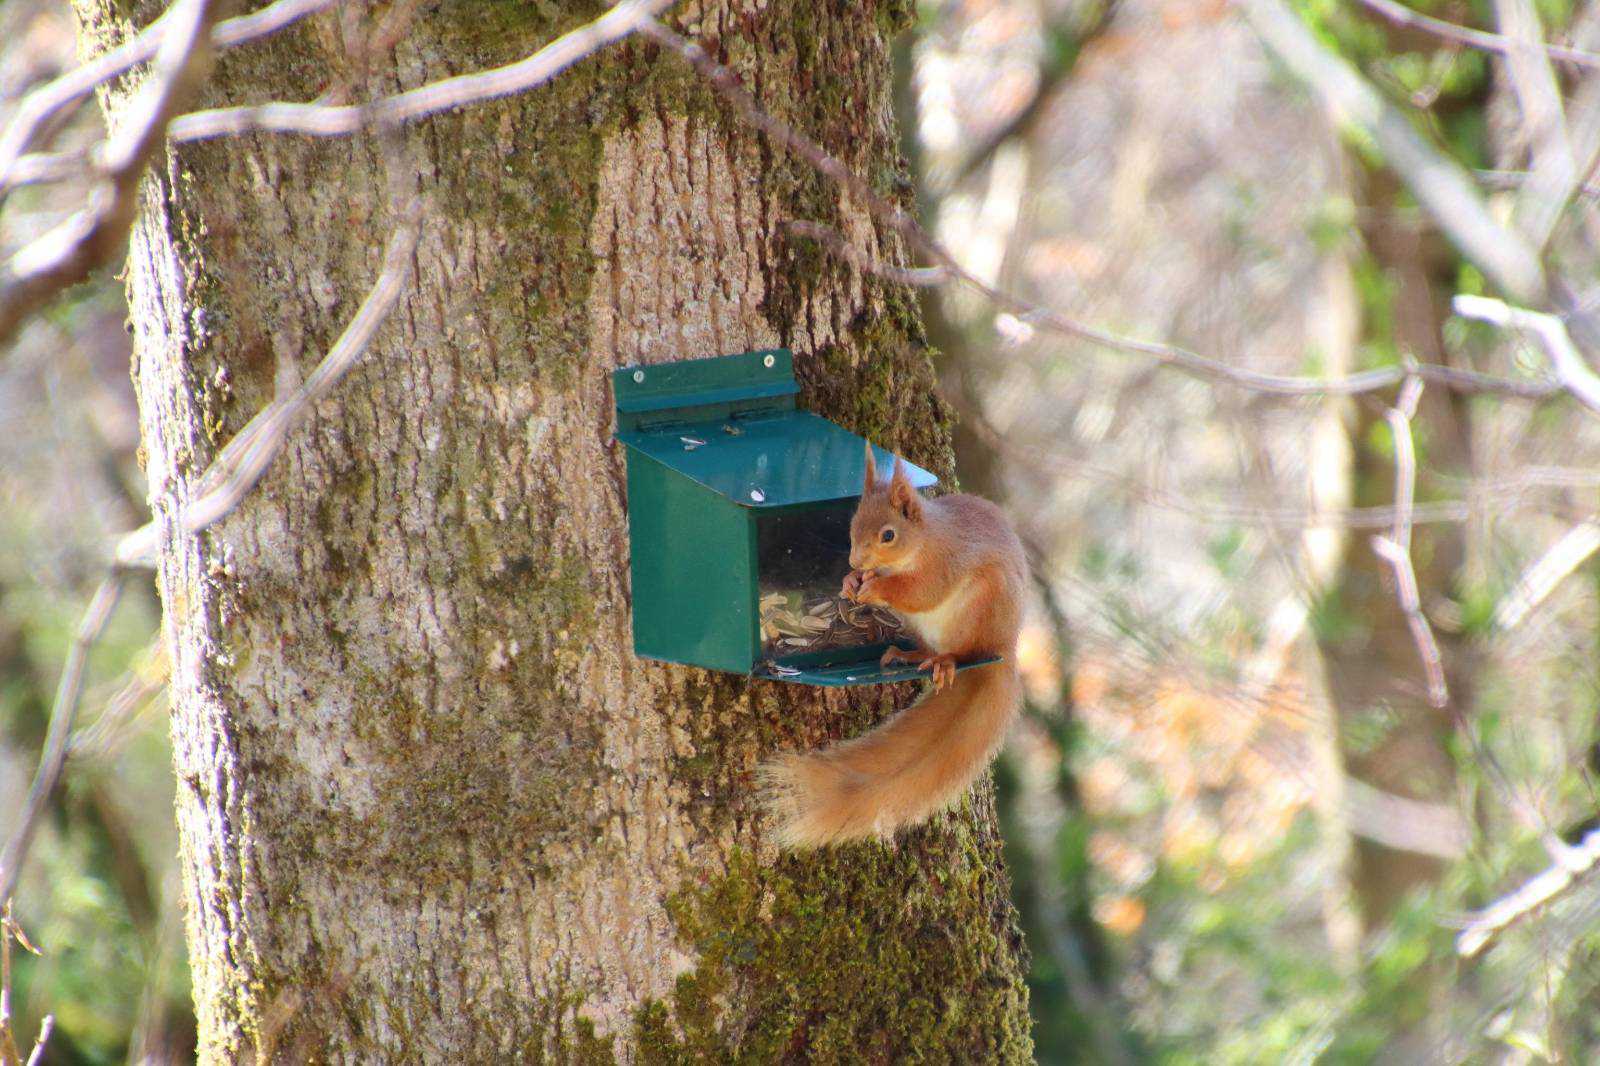 Red squirrel feeding from box placed on tree